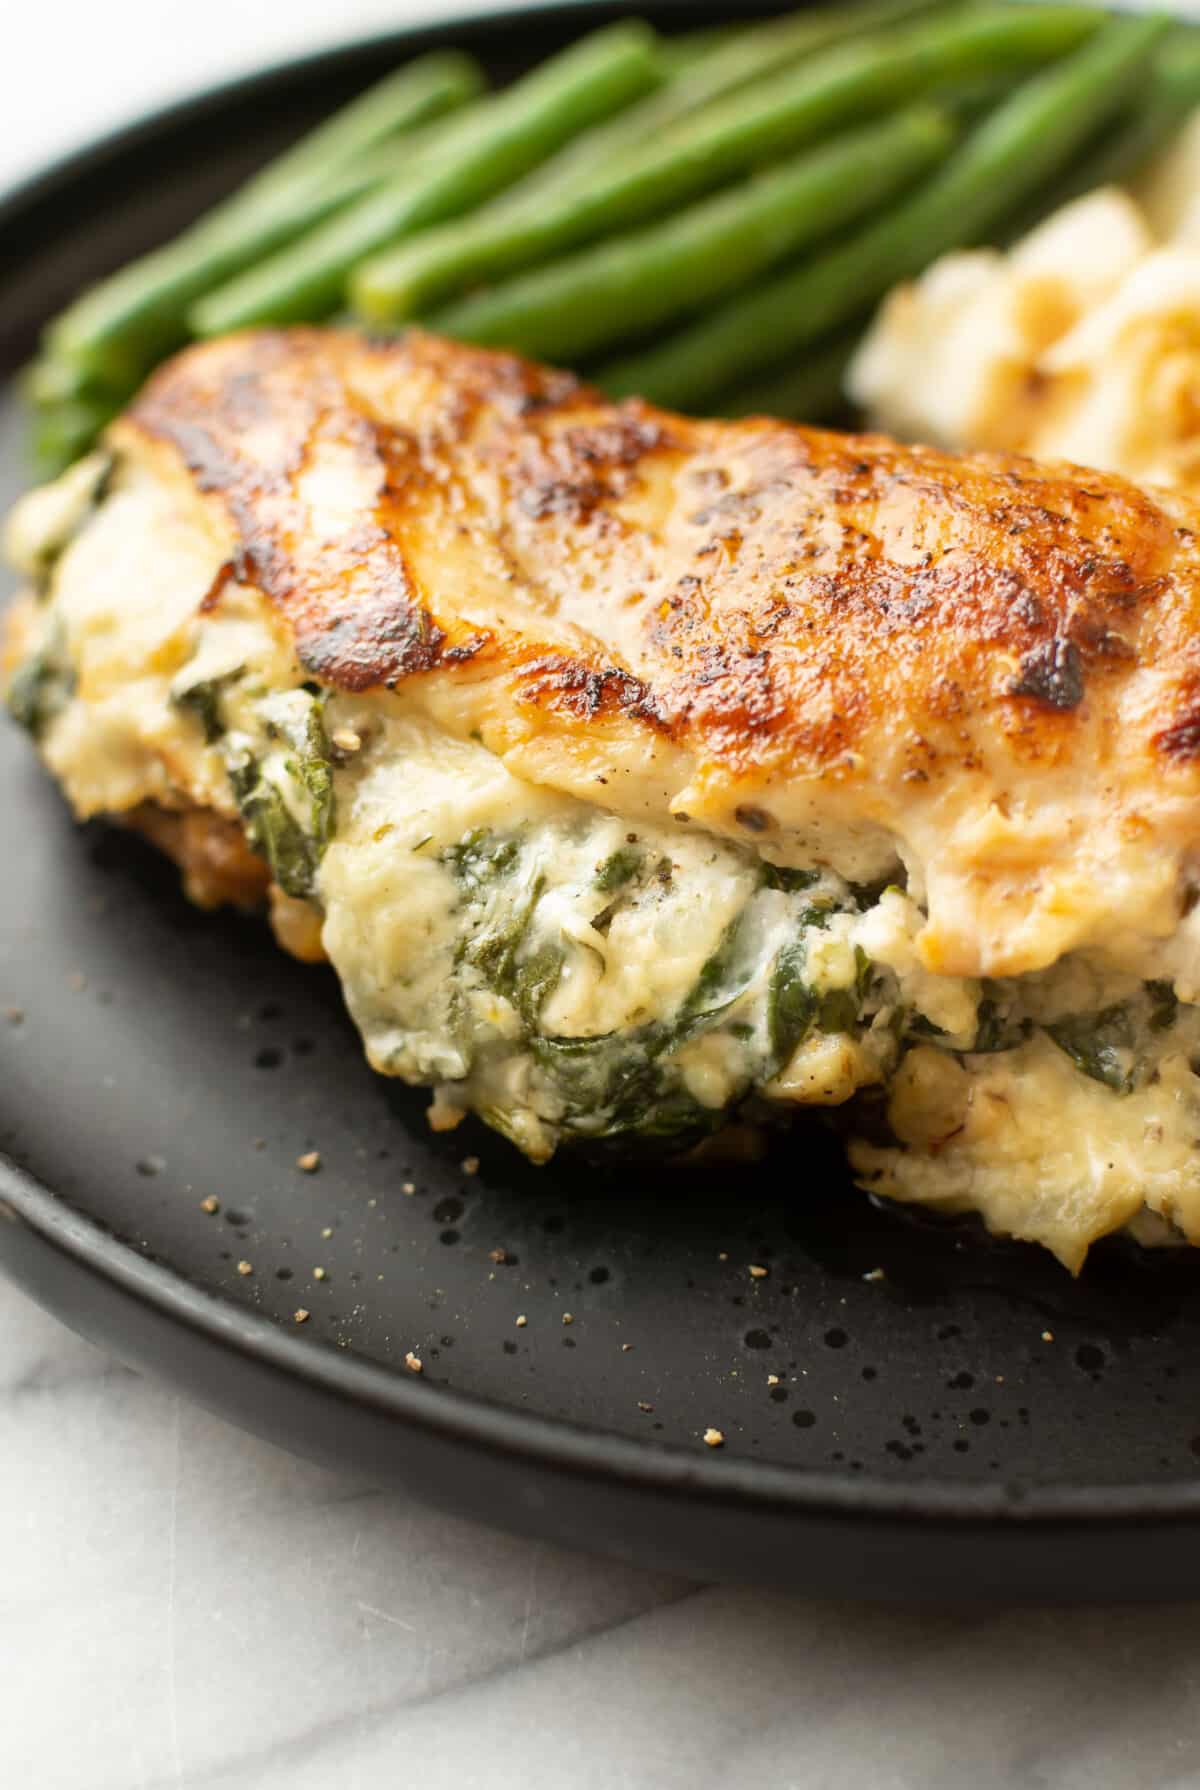 a plate with green beans, mashed potatoes, and a boursin stuffed chicken breast